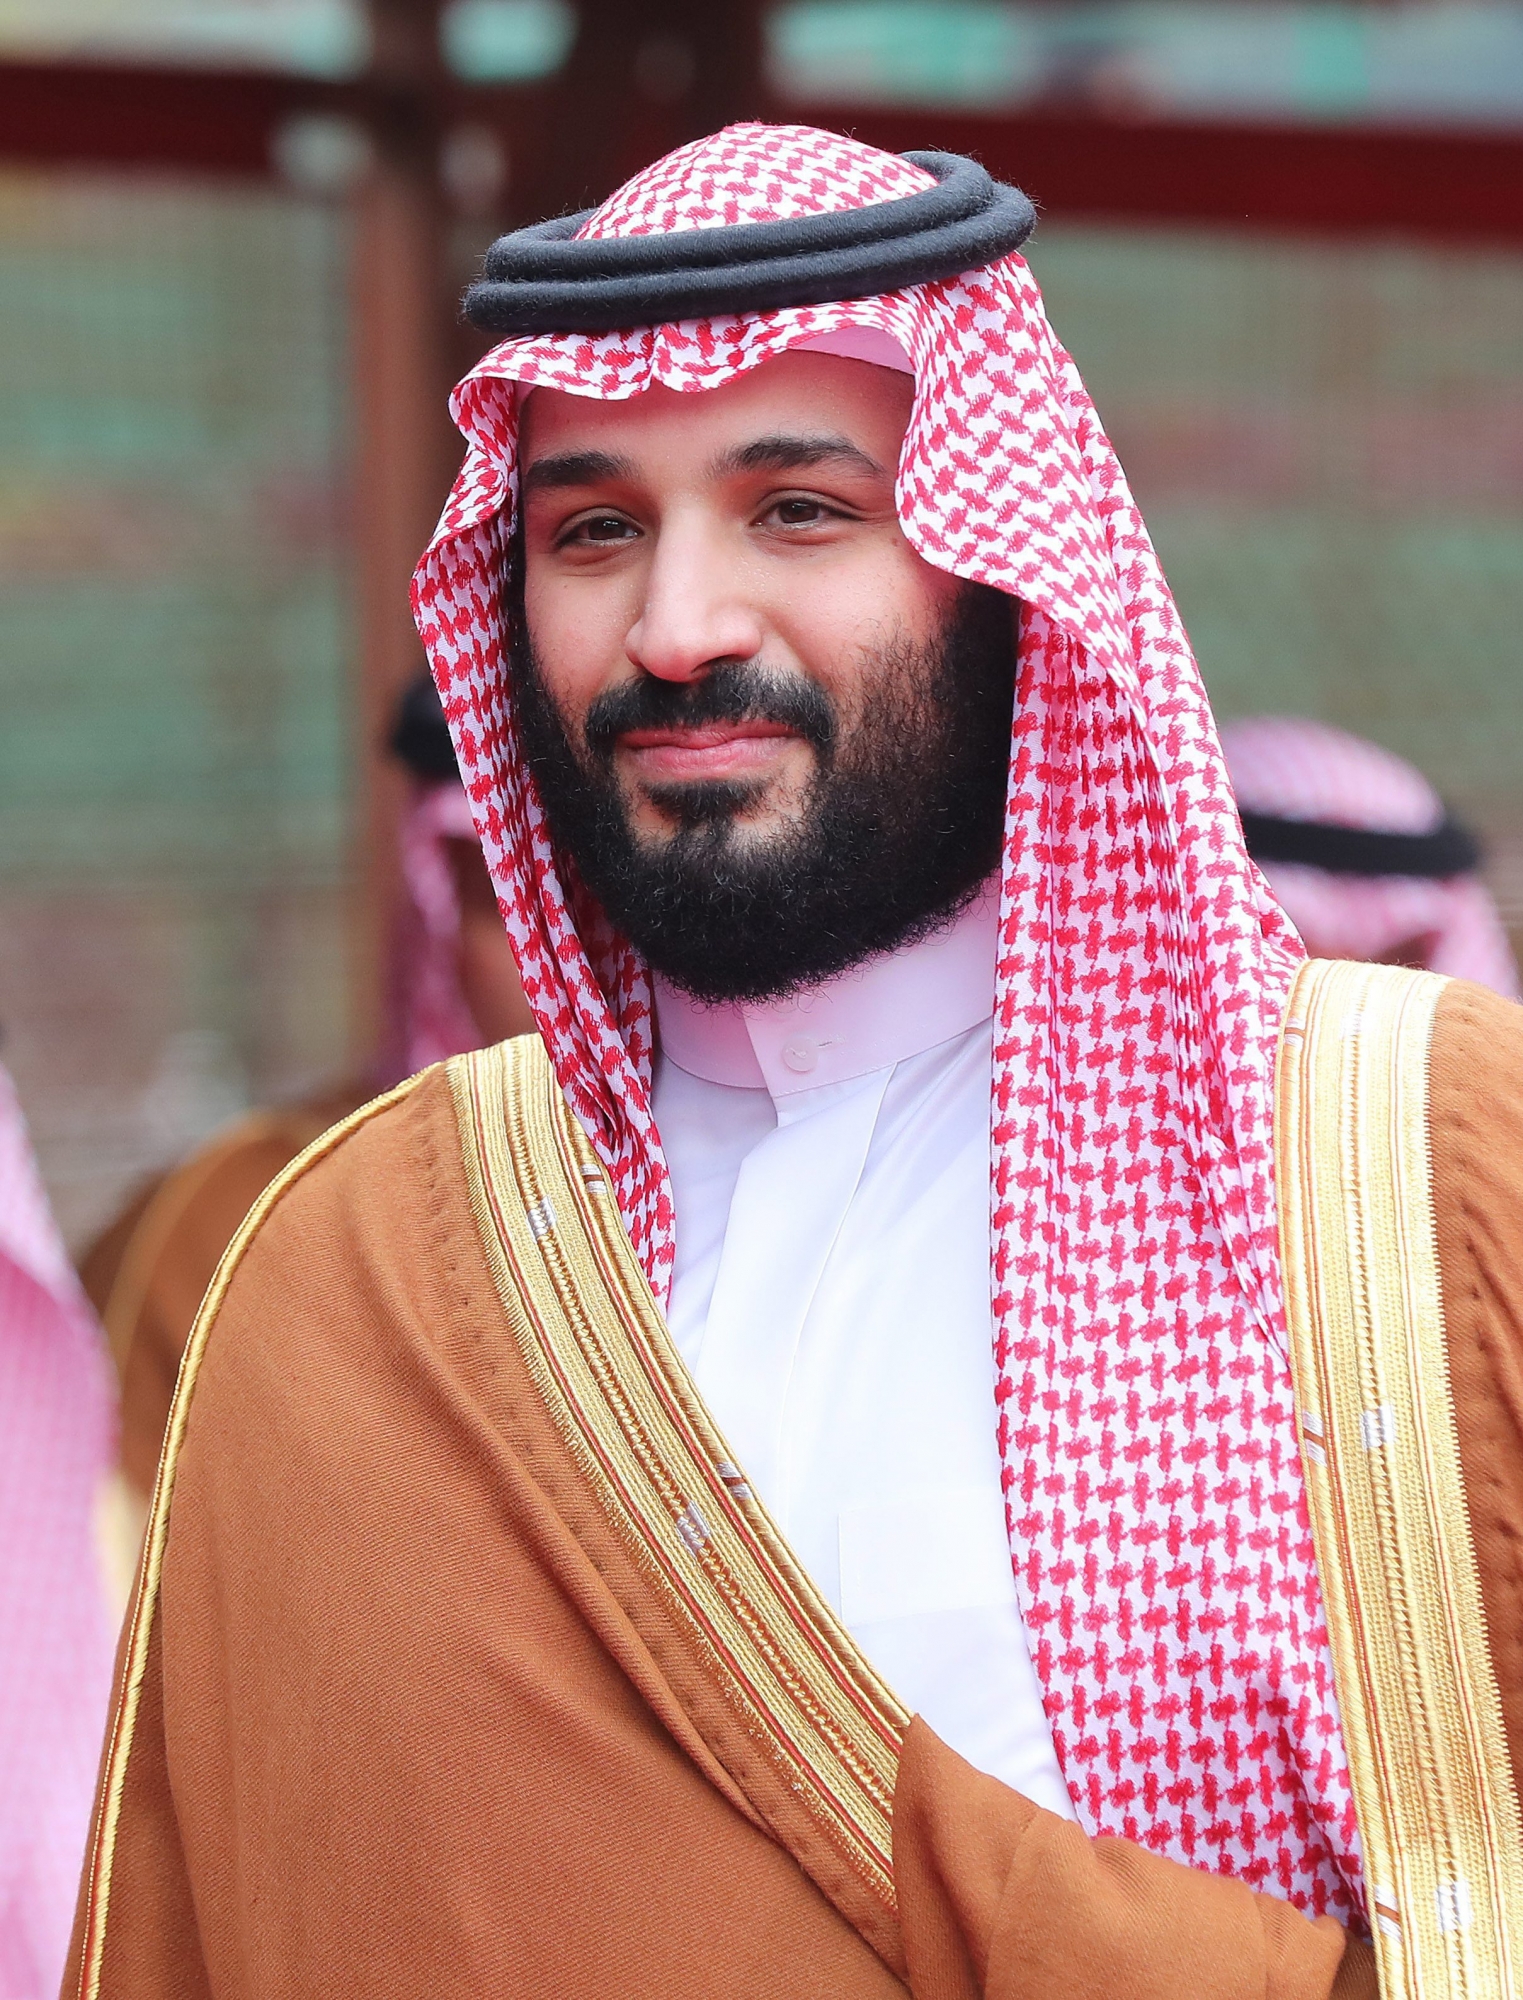 epa07381950 Prince Mohammed Bin Salman Bin Abdulaziz Al-Saud, Crown Prince, Vice President of the Council of Ministers of Defence of the Kingdom of Saudi Arabia (C), attends his ceremonial reception at the president's house in New Delhi, India, 20 February 2019. Prince Mohammed Bin Salman Bin Abdulaziz Al-Saud is on a two-day official visit to India to strengthen political and business ties between the two countries and is scheduled to meet top Indian politicians.  EPA/HARISH TYAGI INDIA SAUDI ARABIA DIPLOMACY